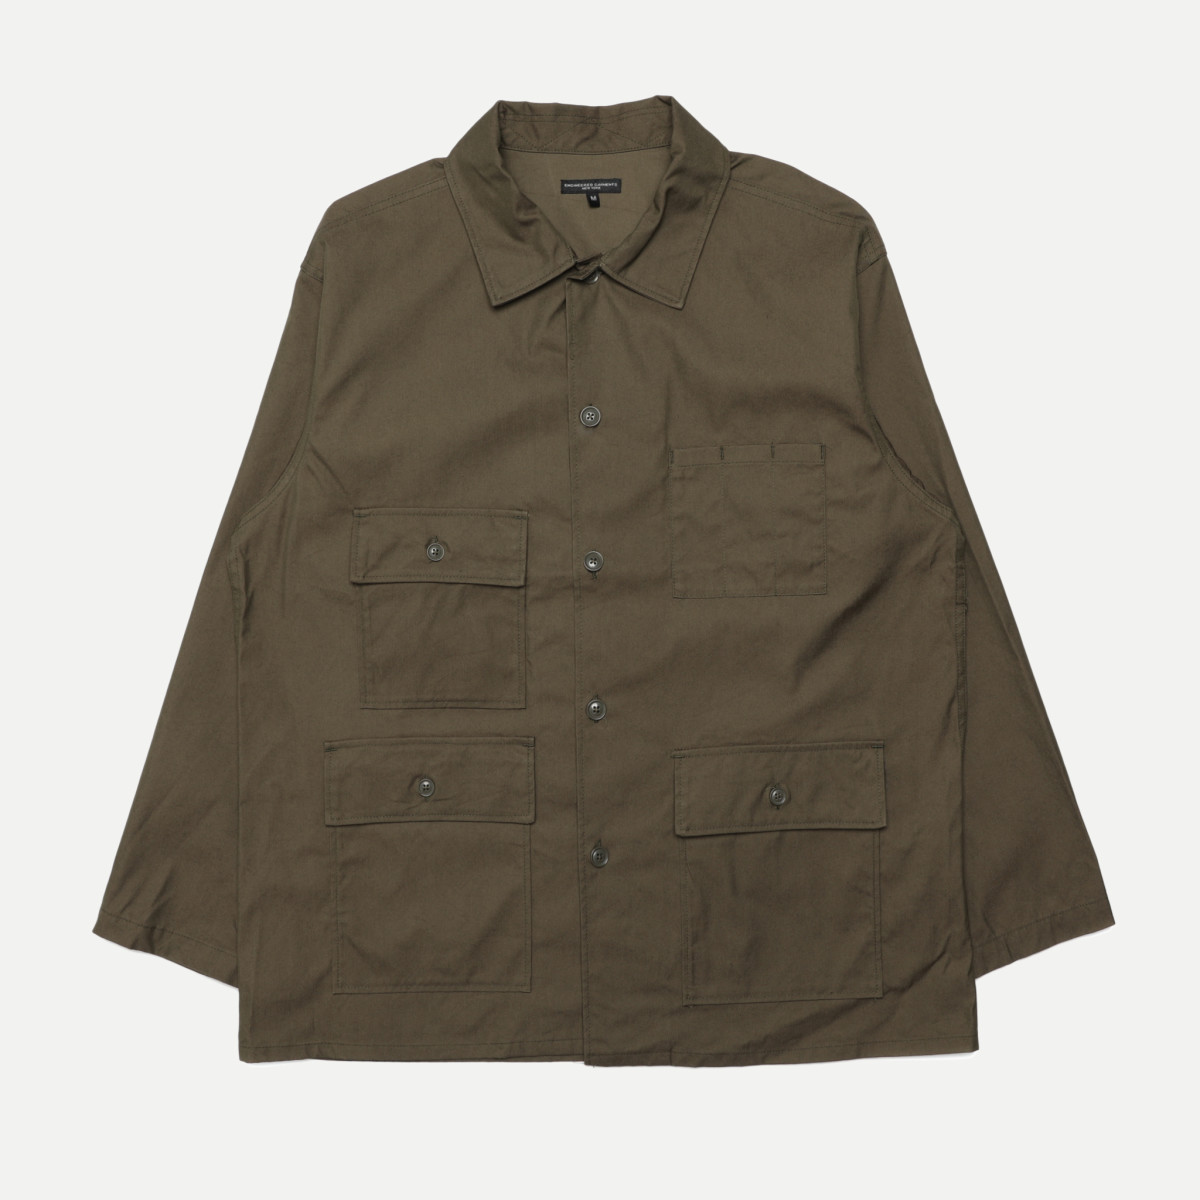 Engineered Garments FW23 is now available at SYSTEM - Acquire